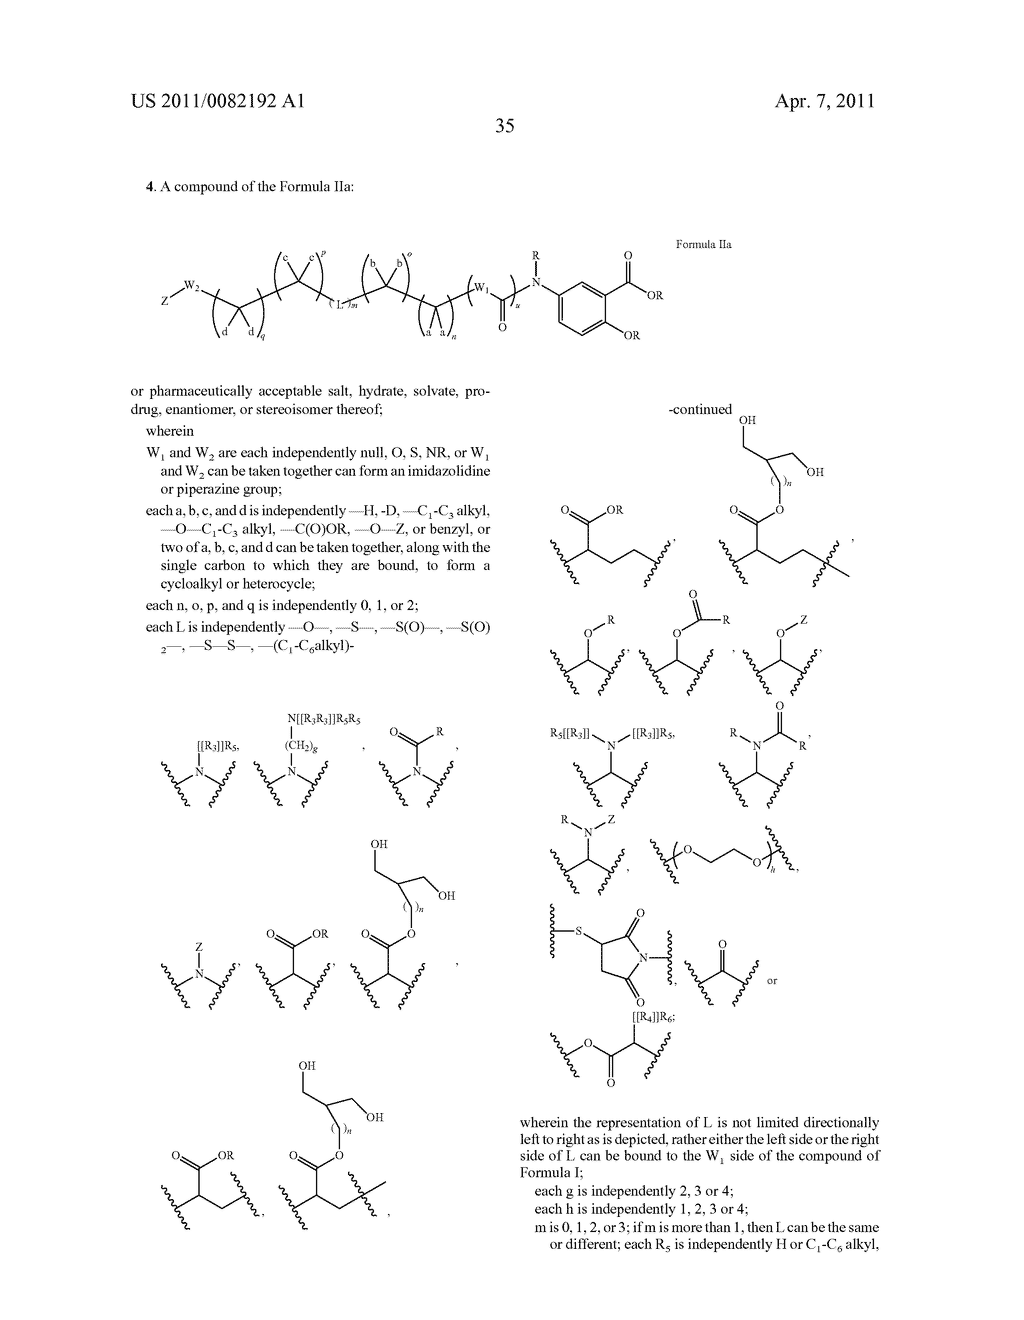 LIPOIC ACID ACYLATED SALICYLATE DERIVATIVES AND THEIR USES - diagram, schematic, and image 36